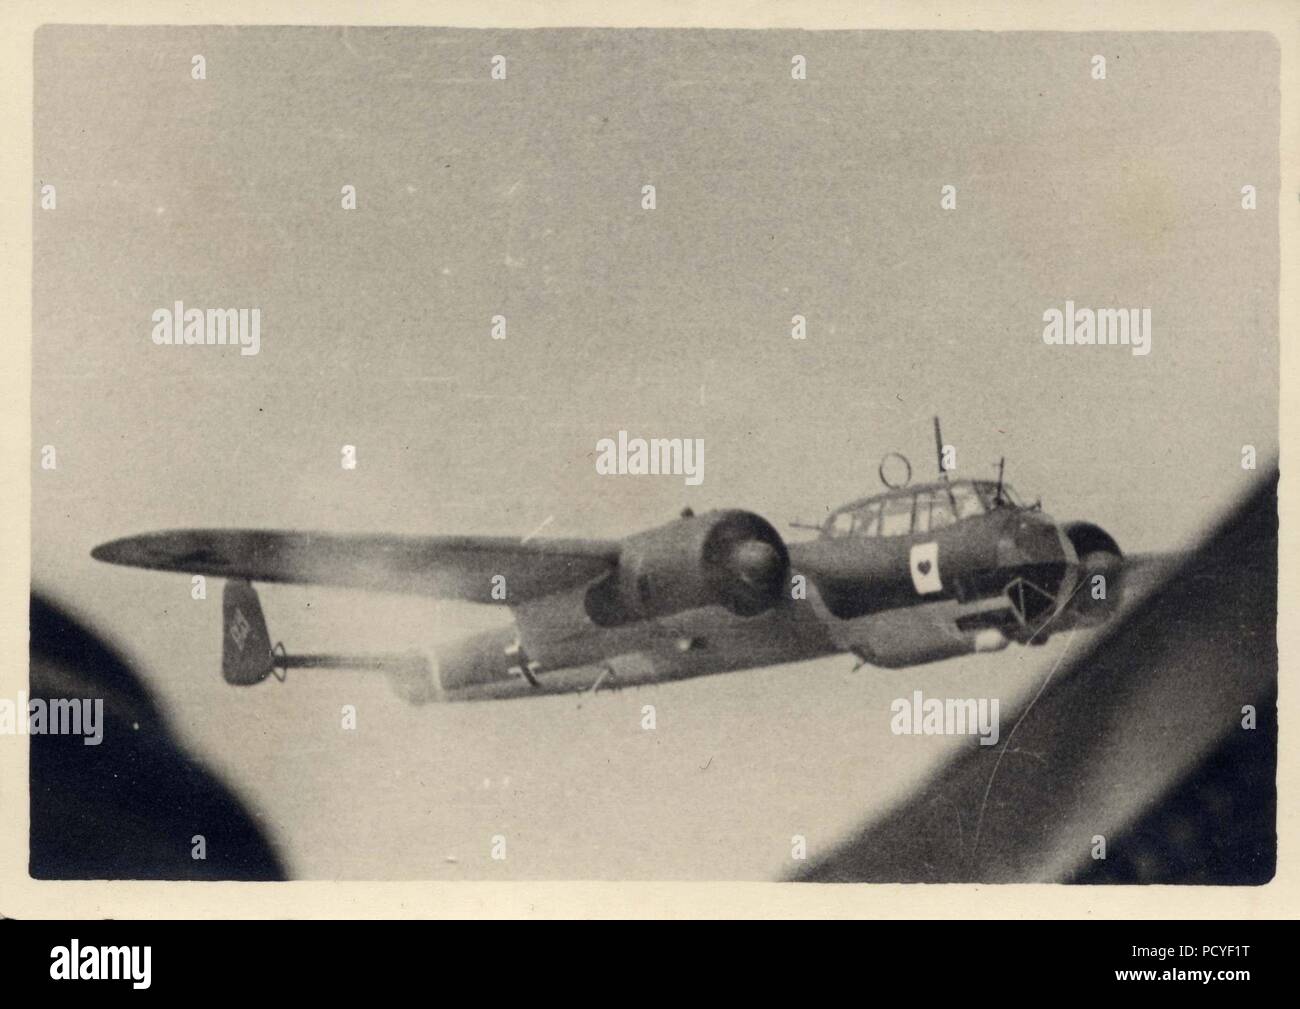 Image from the photo album of Oberfeldwebel Gotthilf Benseler of 9. Staffel, Kampfgeschwader 3: Dornier Do17Z-2s of 9. Staffel, Kampfgeschwader 3 in formation in 1939. The aircraft in this image carries the early 'Ace of Hearts' Staffel badge, inherited from the unit's predecessor 9./KG 153. In later versions, the Staffel badge showed only the red heart and the large, white playing card was omitted. The aircraft are armed with machine-guns, which may indicate that this image was taken early in the campaign against Poland in 1939. Stock Photo